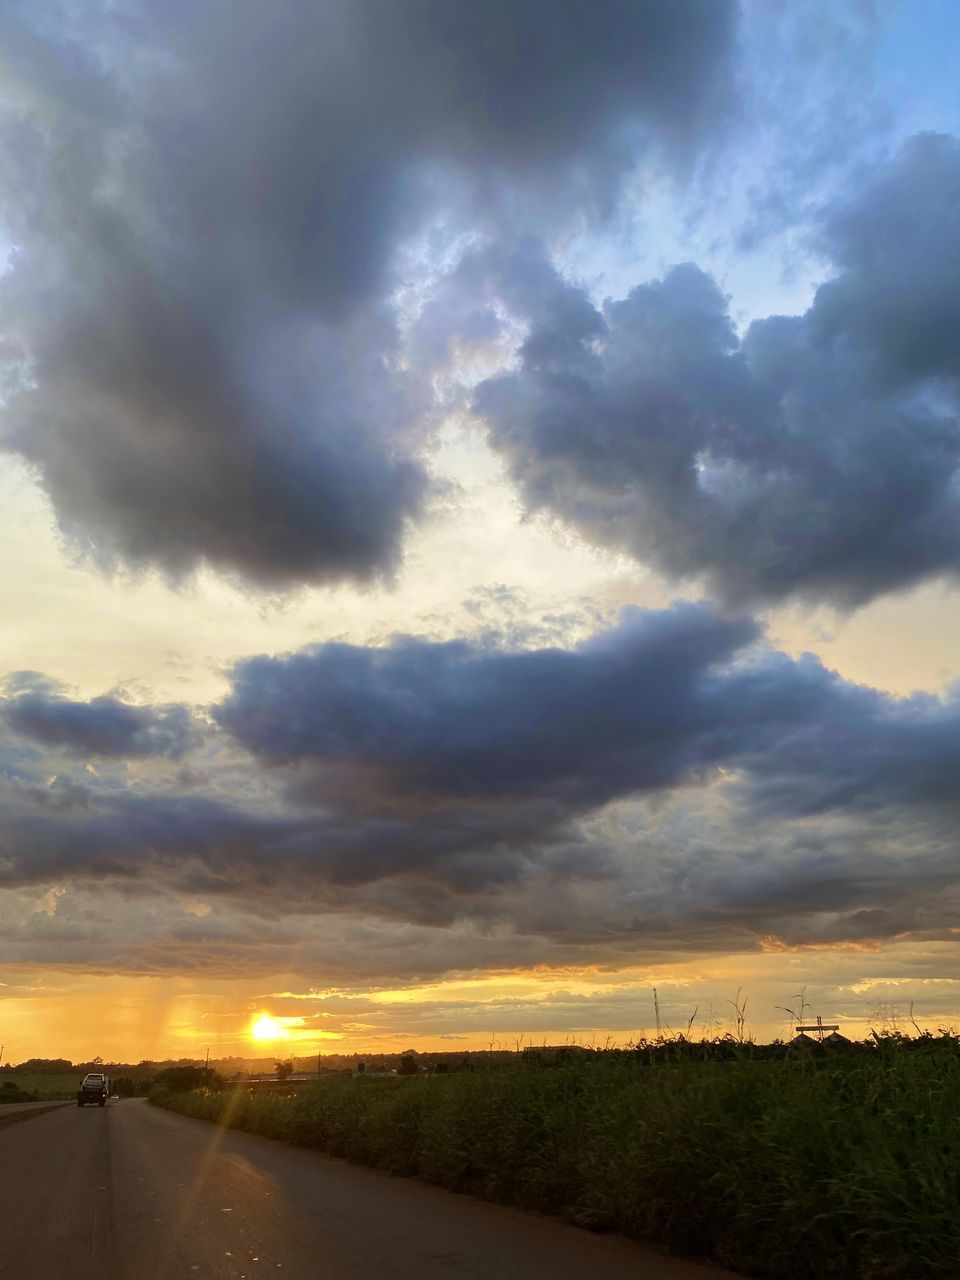 sky, cloud, environment, sunset, road, horizon, nature, landscape, beauty in nature, dramatic sky, transportation, sunlight, scenics - nature, no people, cloudscape, dusk, plant, land, the way forward, evening, rural scene, storm, outdoors, sun, tranquility, field, horizon over land, travel, sunbeam, grass, moody sky, non-urban scene, tranquil scene, vanishing point, street, country road, blue, diminishing perspective